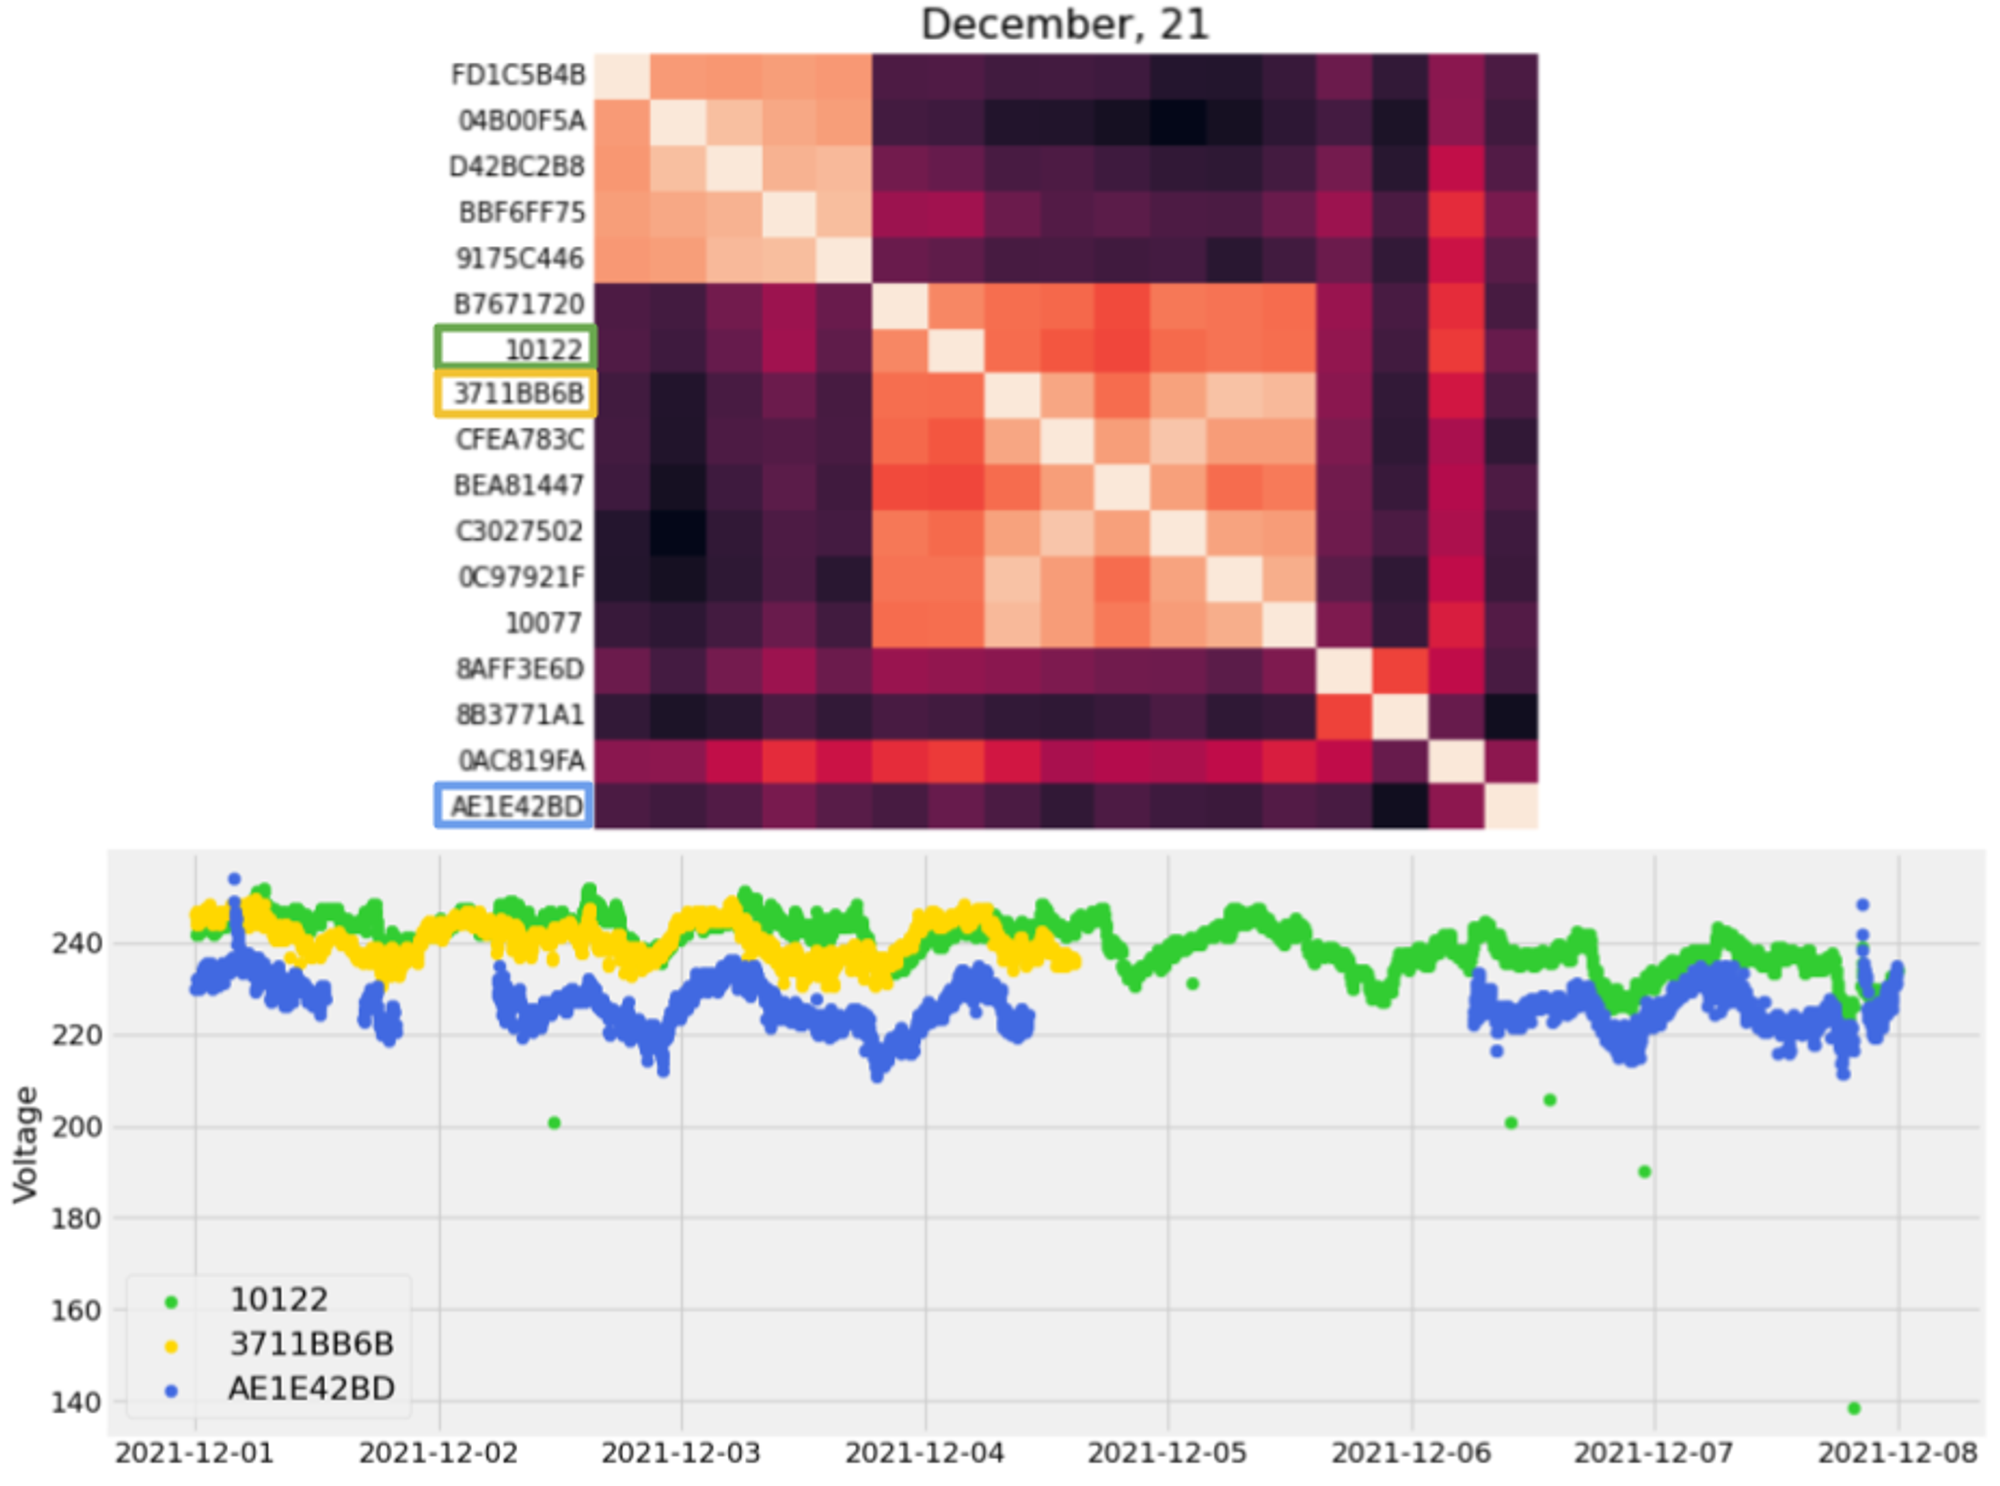 Figure 11a. Varprox matrix at site 59 in December 2021, and voltage time series for highlighted respondents over the first week of that month. In this case, the selected varprox distances are perceptible in the voltage time series: the voltages at 10122 and 3711BB6B track quite closely, while the voltage behavior at AE1E42BD looks very different.